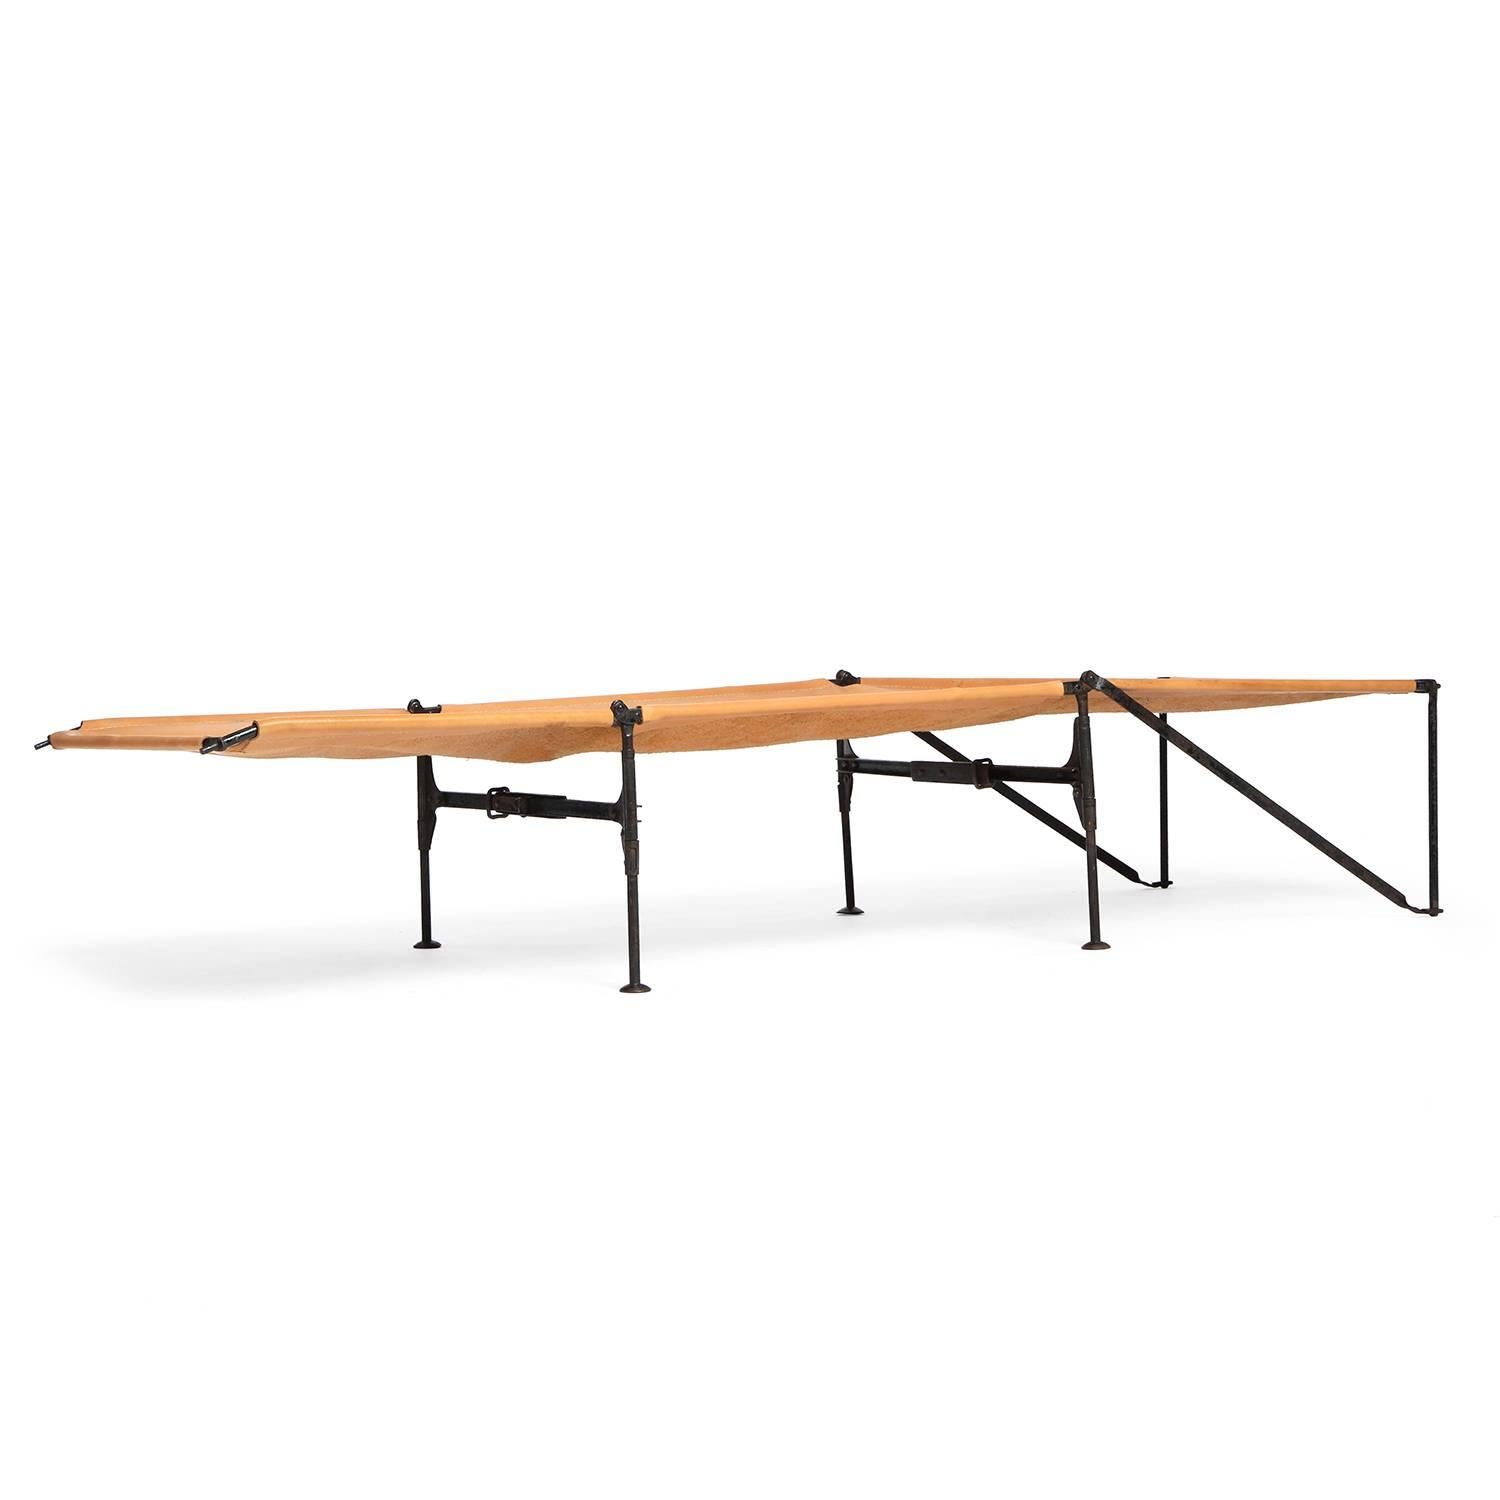 A spare and interesting folding cot having an architectural wrought iron structure and a thick natural hand stitched leather surface.